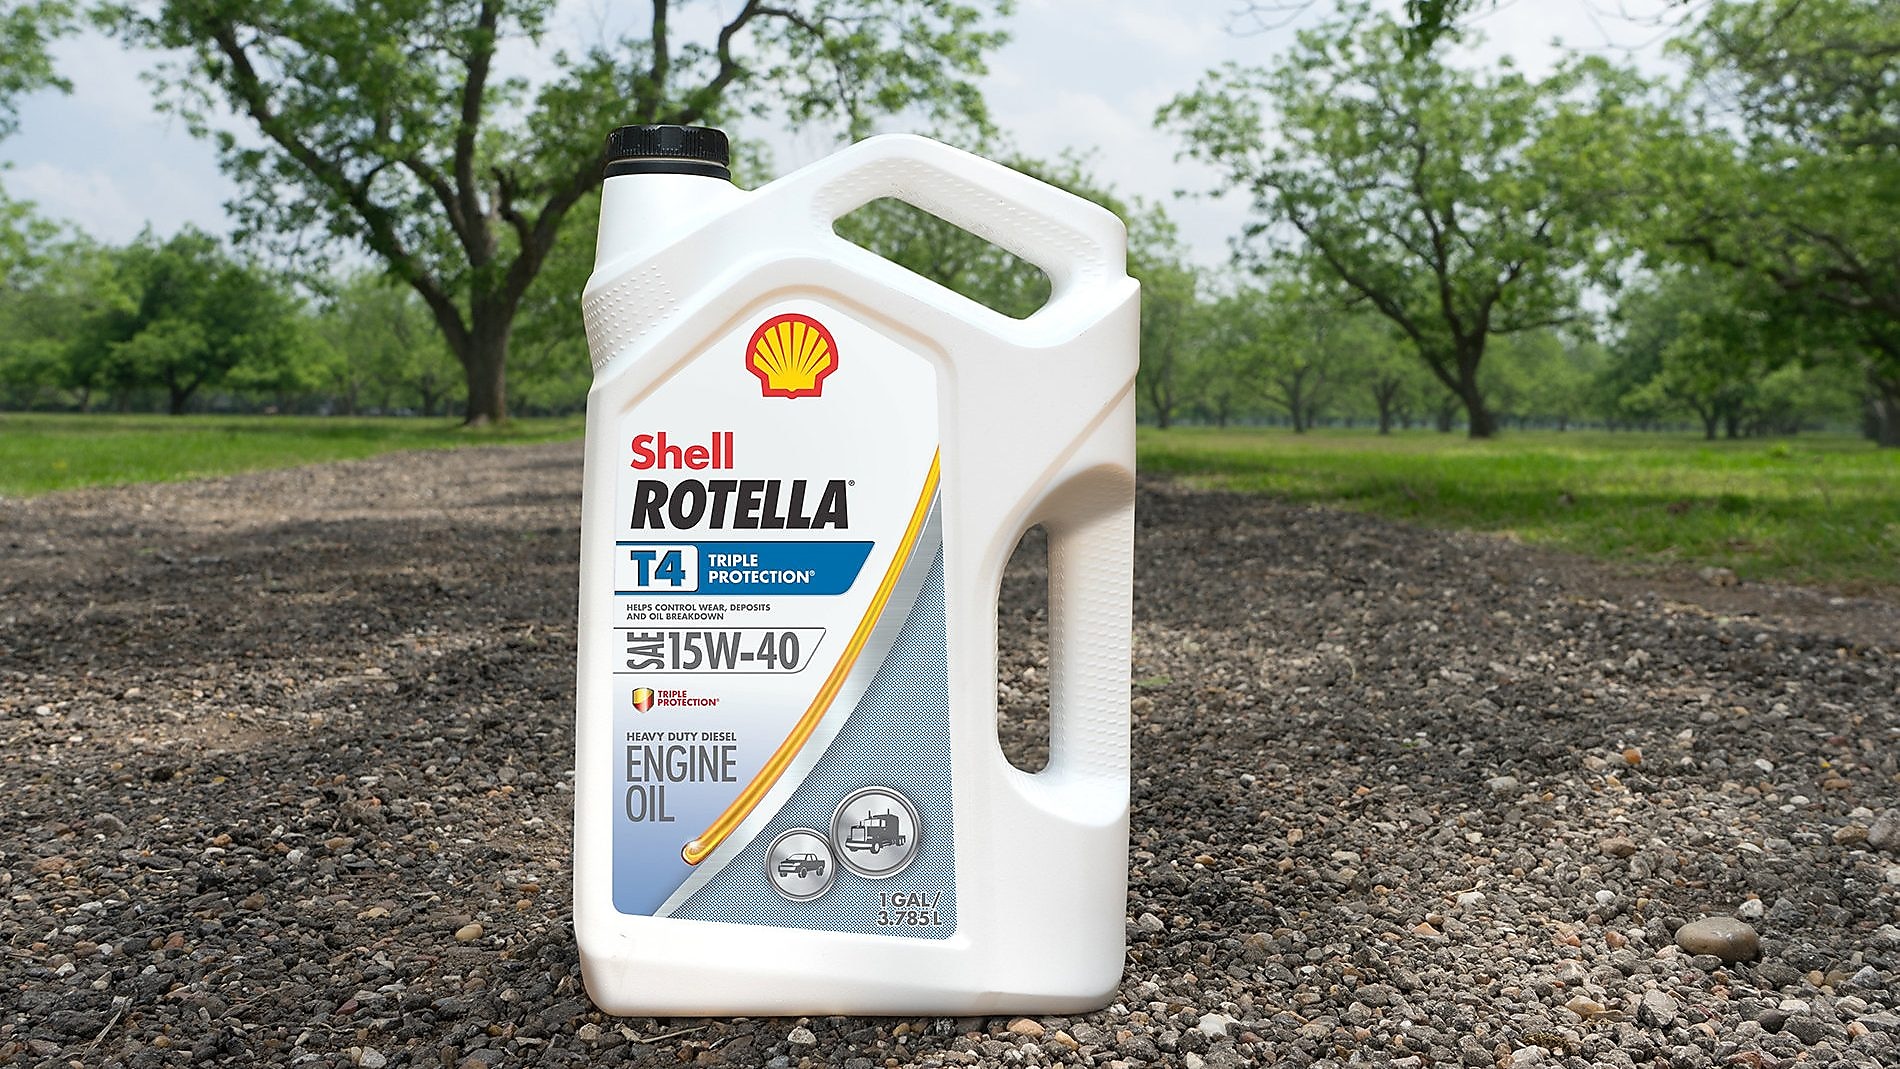 shell-rotella-t4-triple-protection-diesel-engine-oil-shell-rotella